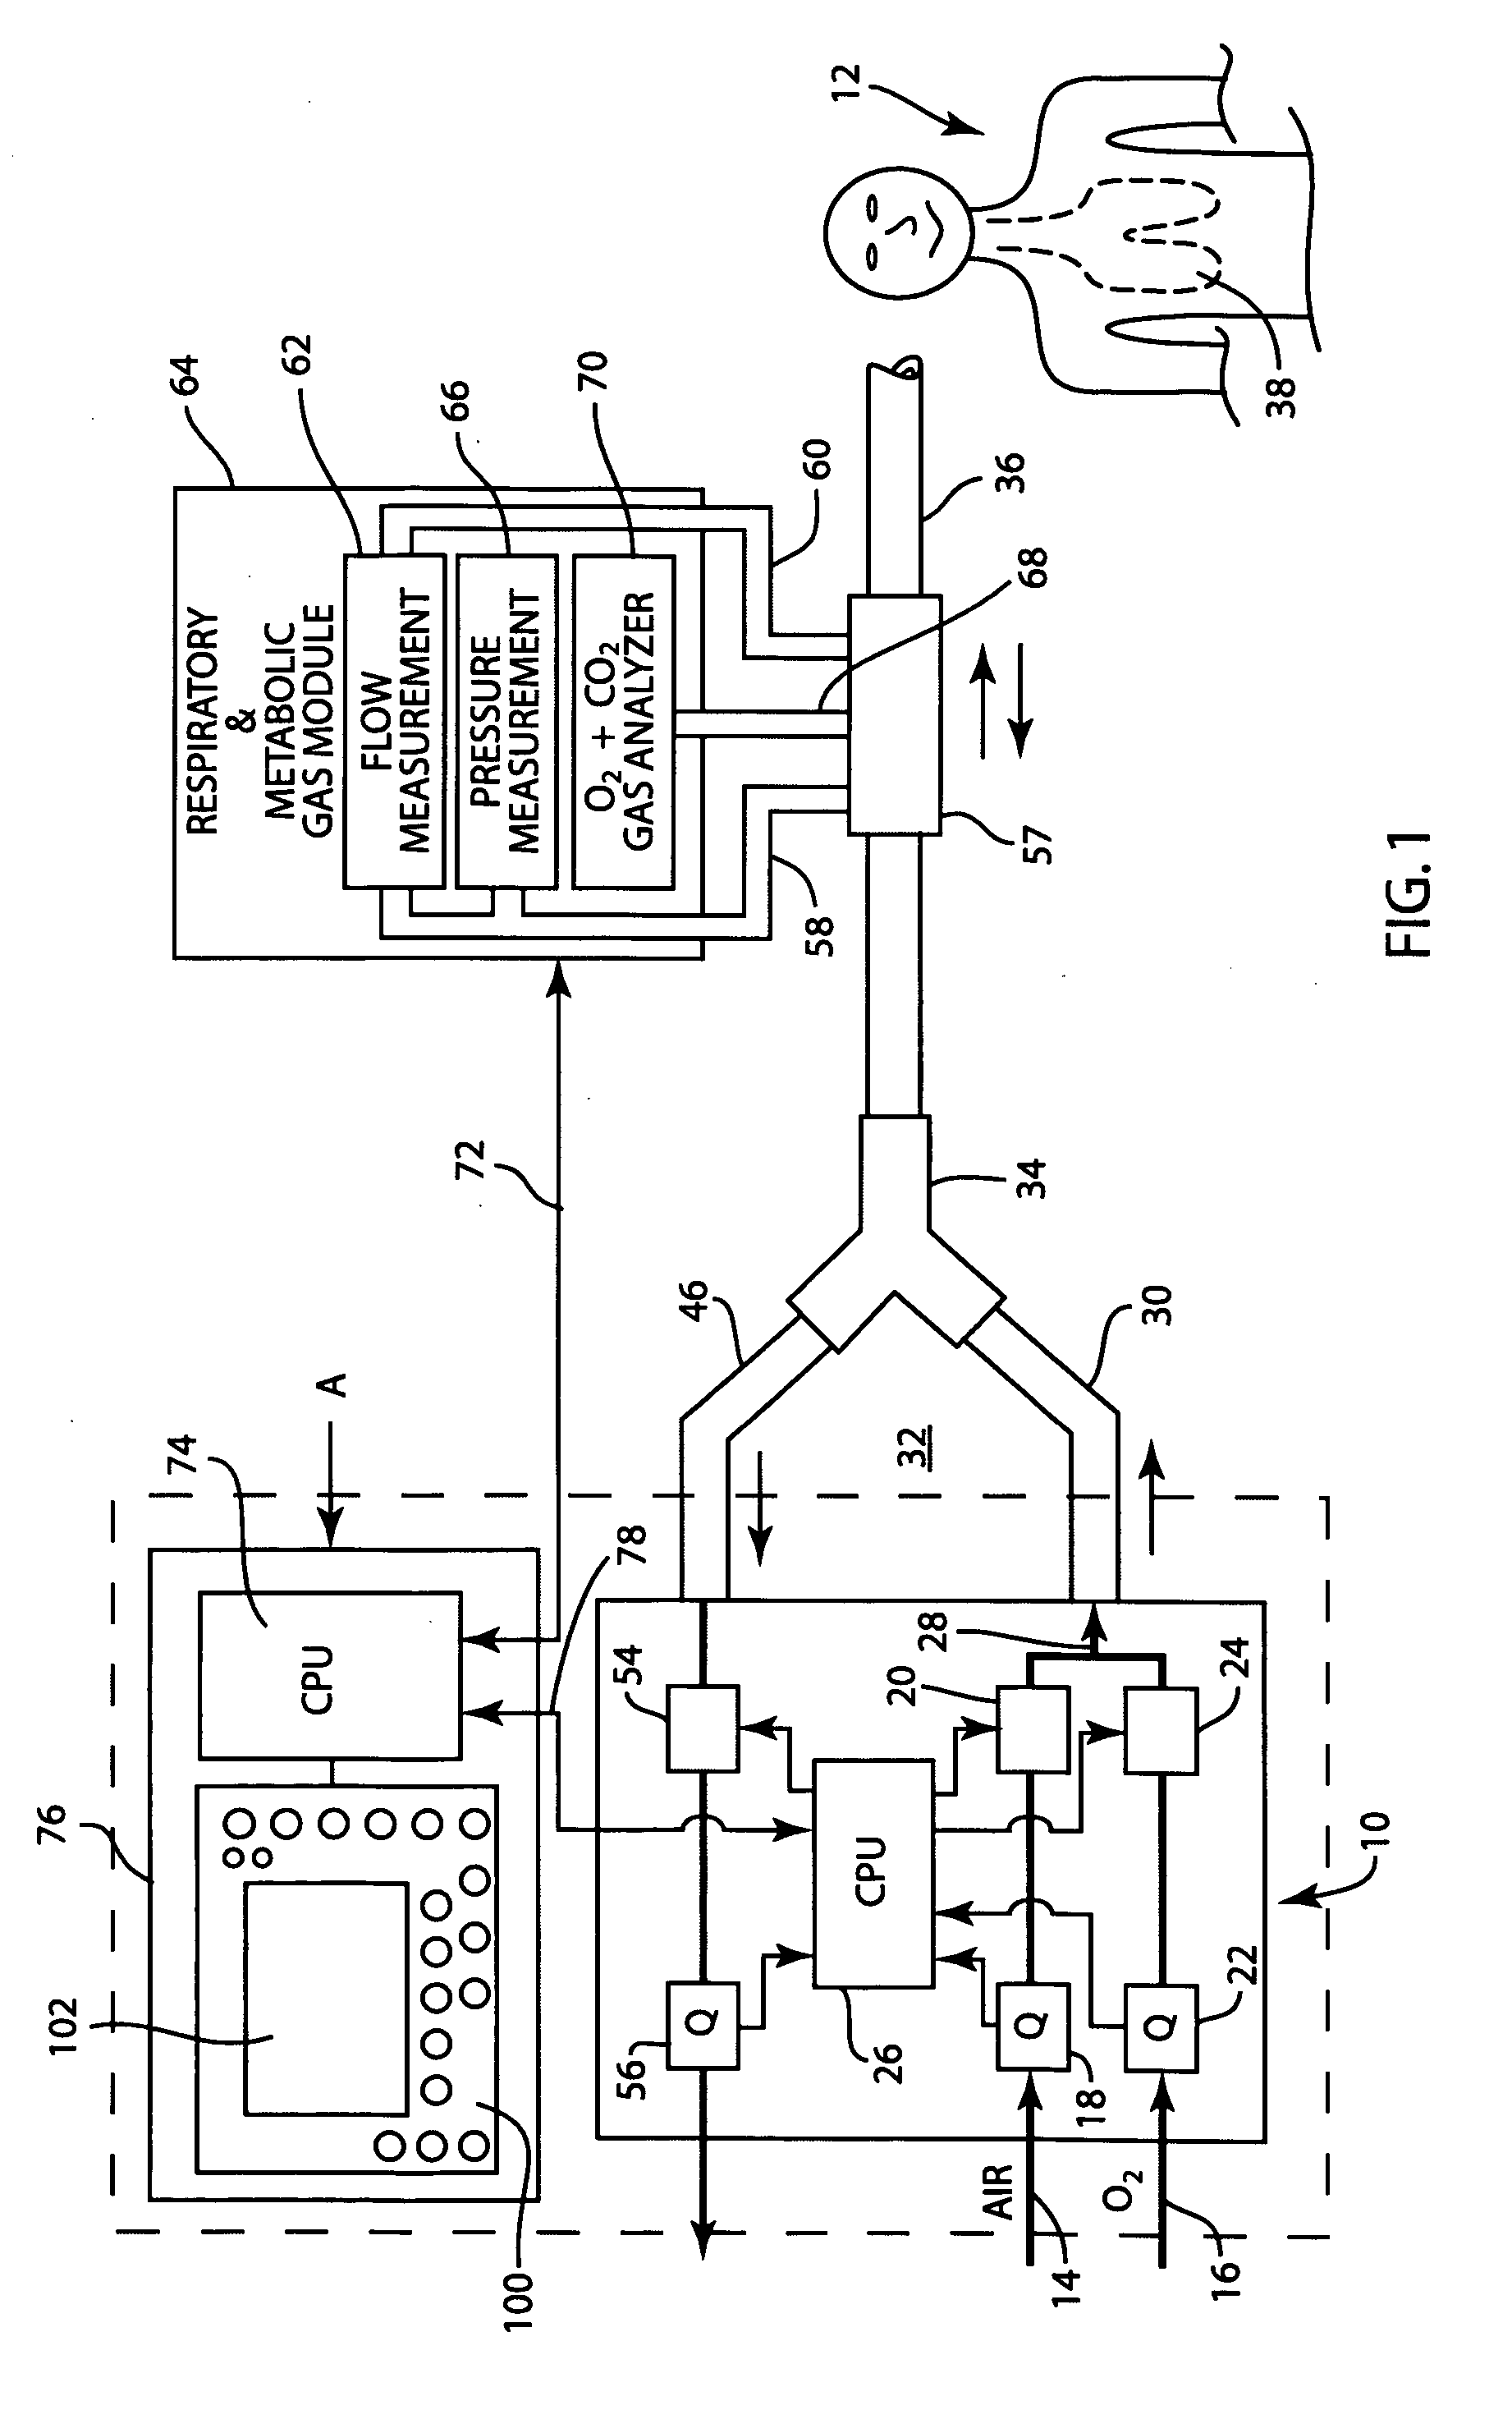 Apparatus and method for identifying FRC and PEEP characteristics